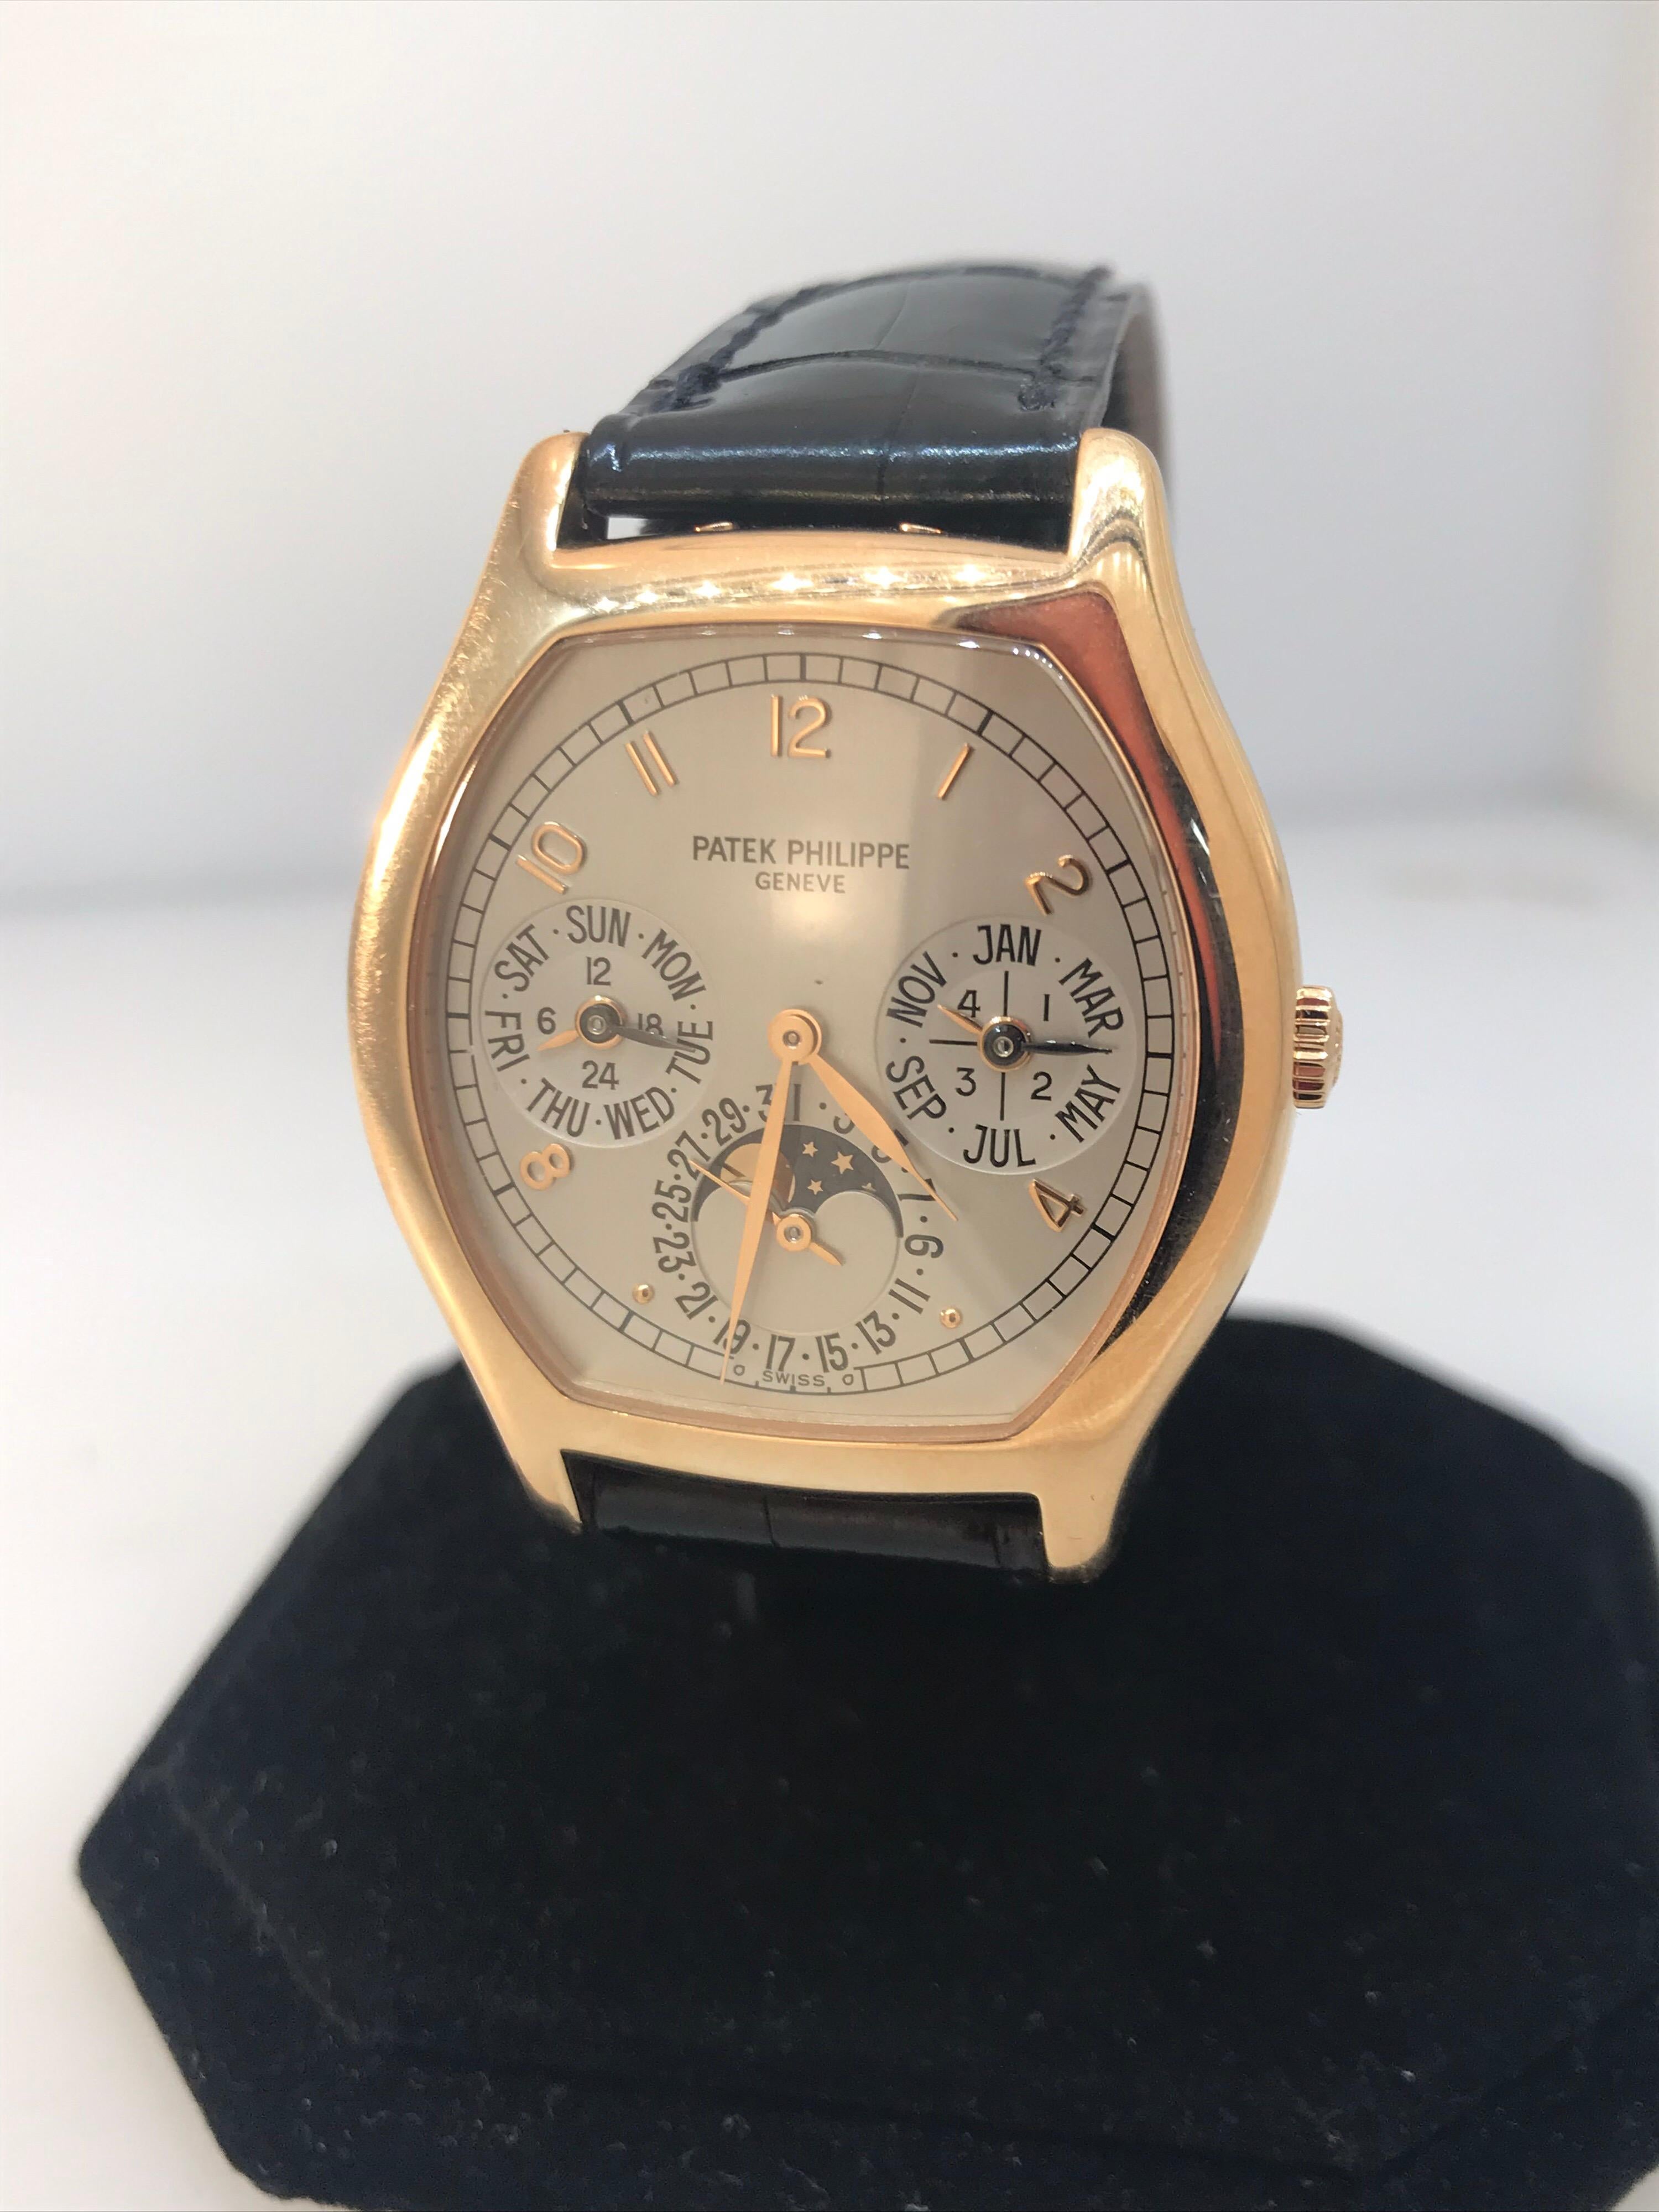 Patek Phiippe Grand Complications Perpetual Calendar Rose Gold Men's Watch 5040R In Excellent Condition For Sale In New York, NY